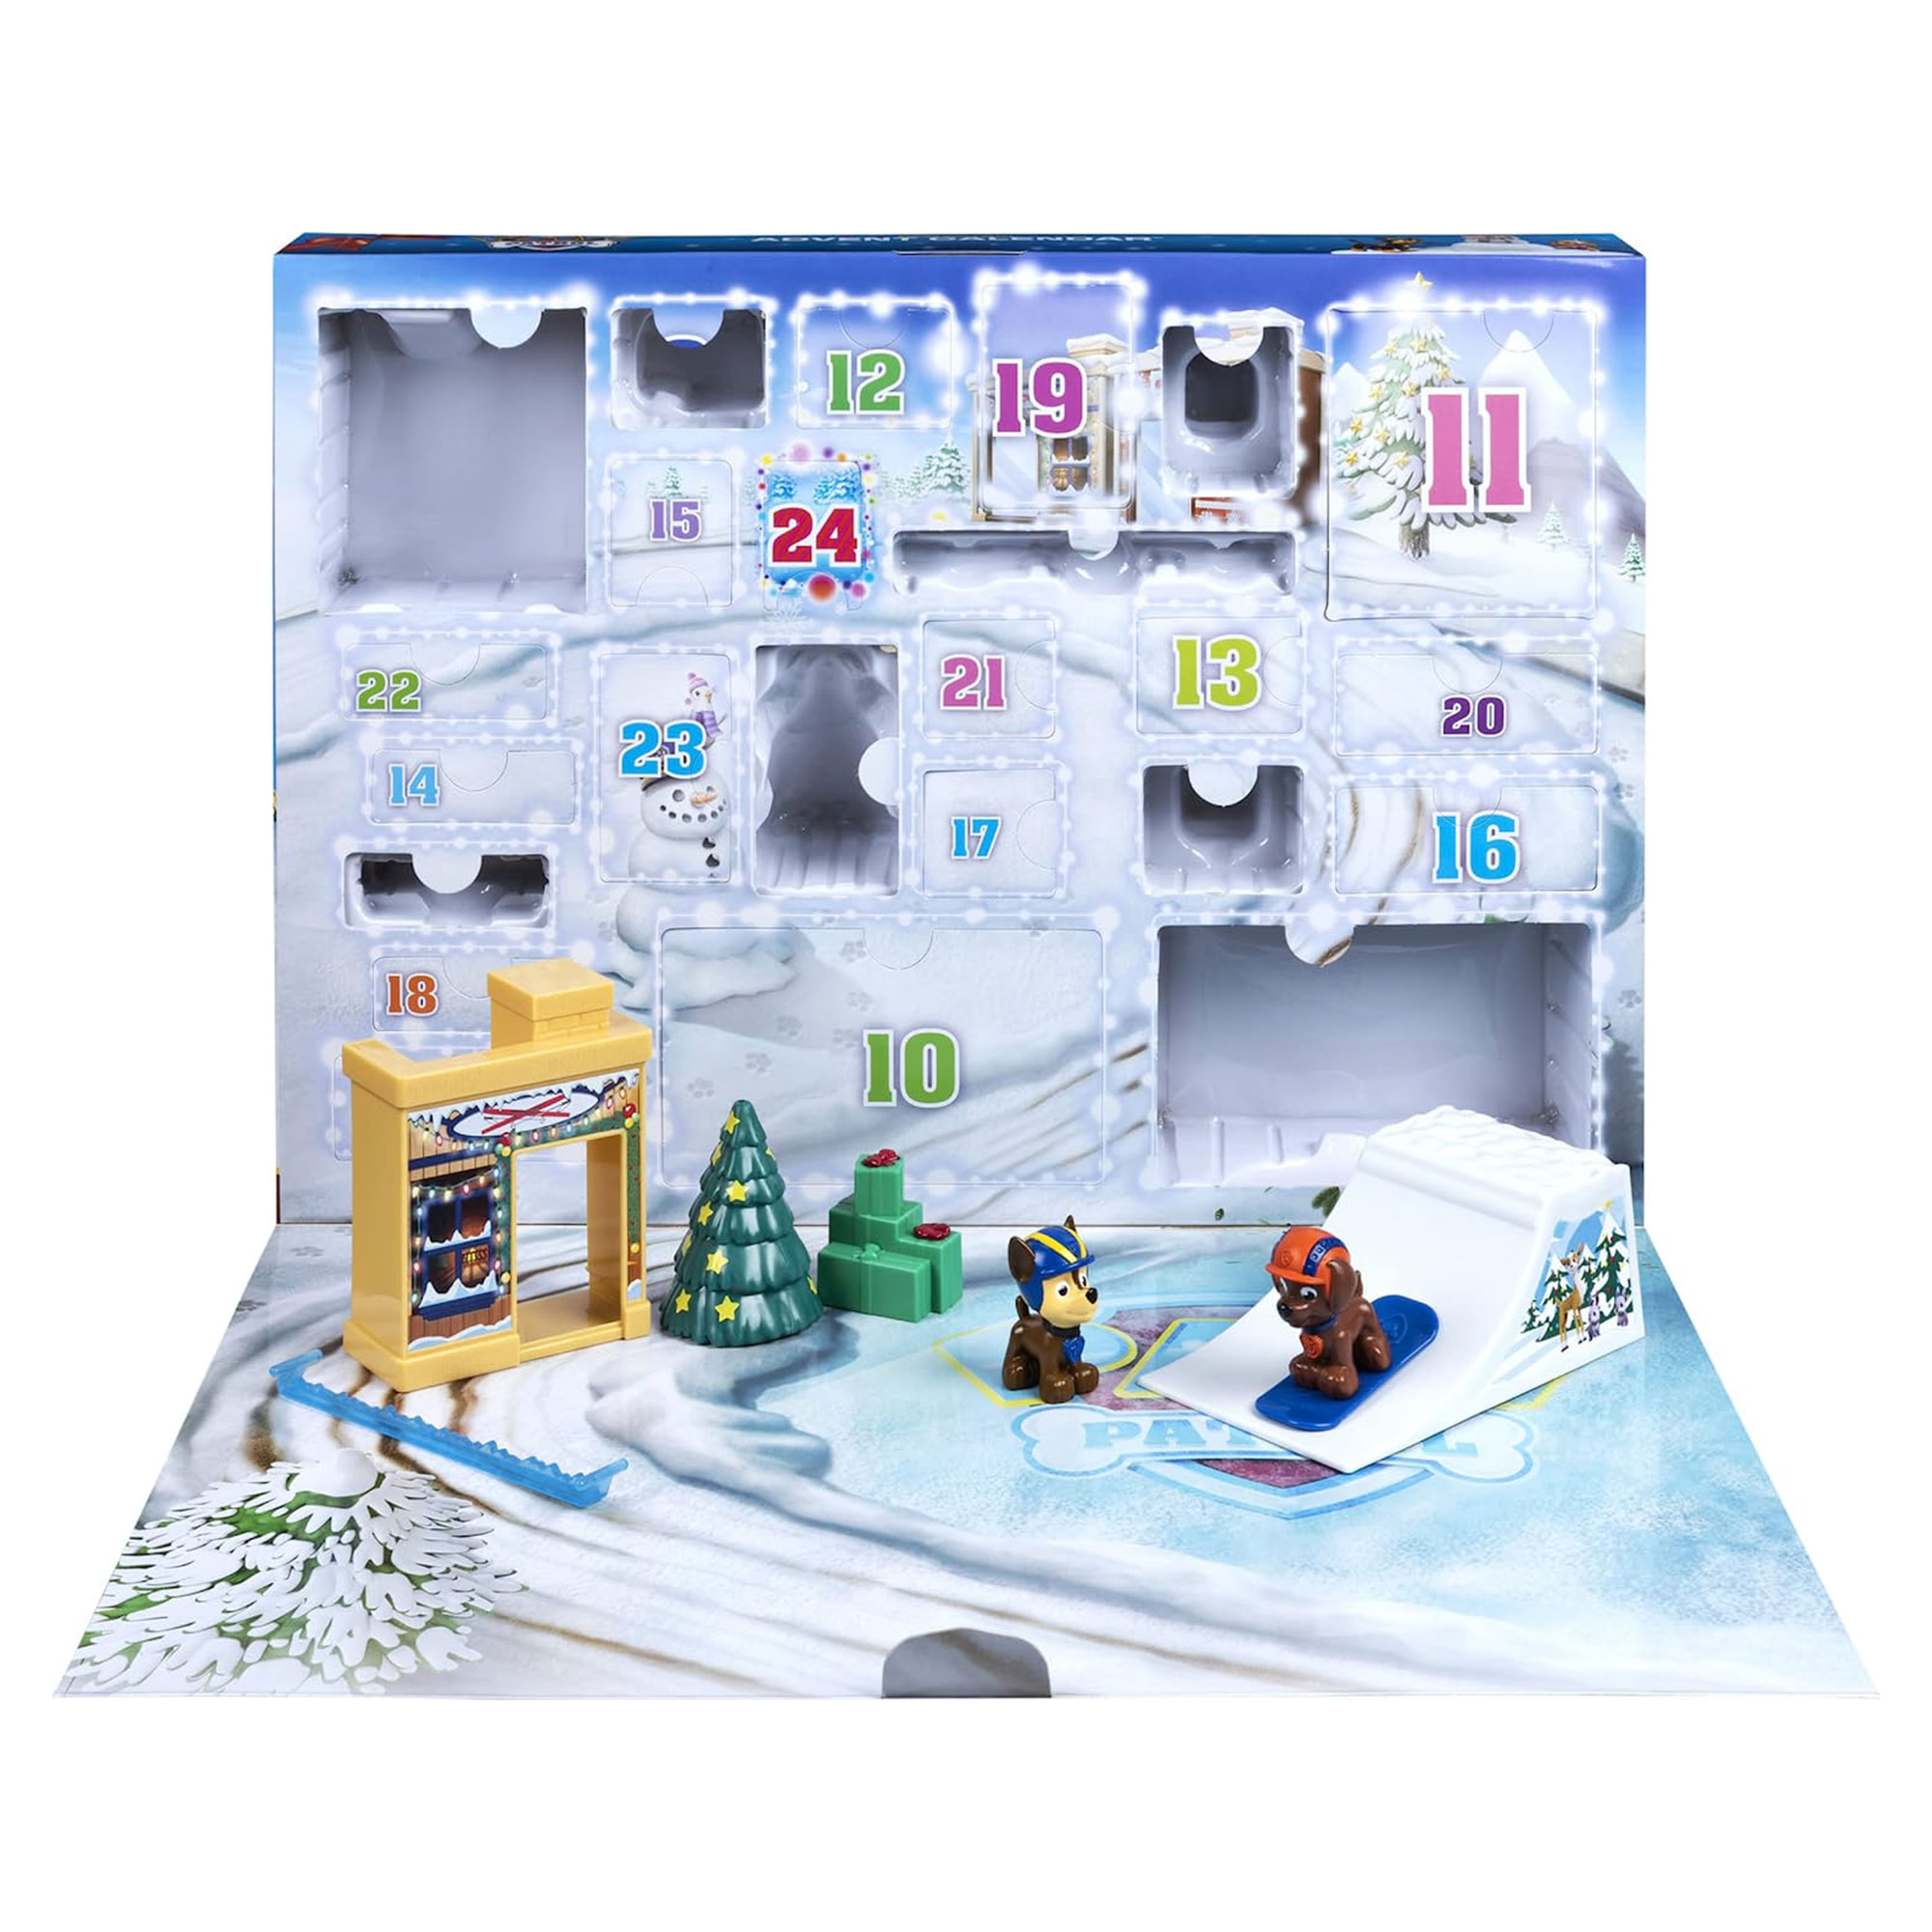 PAW Patrol Advent Calendar with 24 Collectible Toys for Kids Ages 3 & Up - image 2 of 6